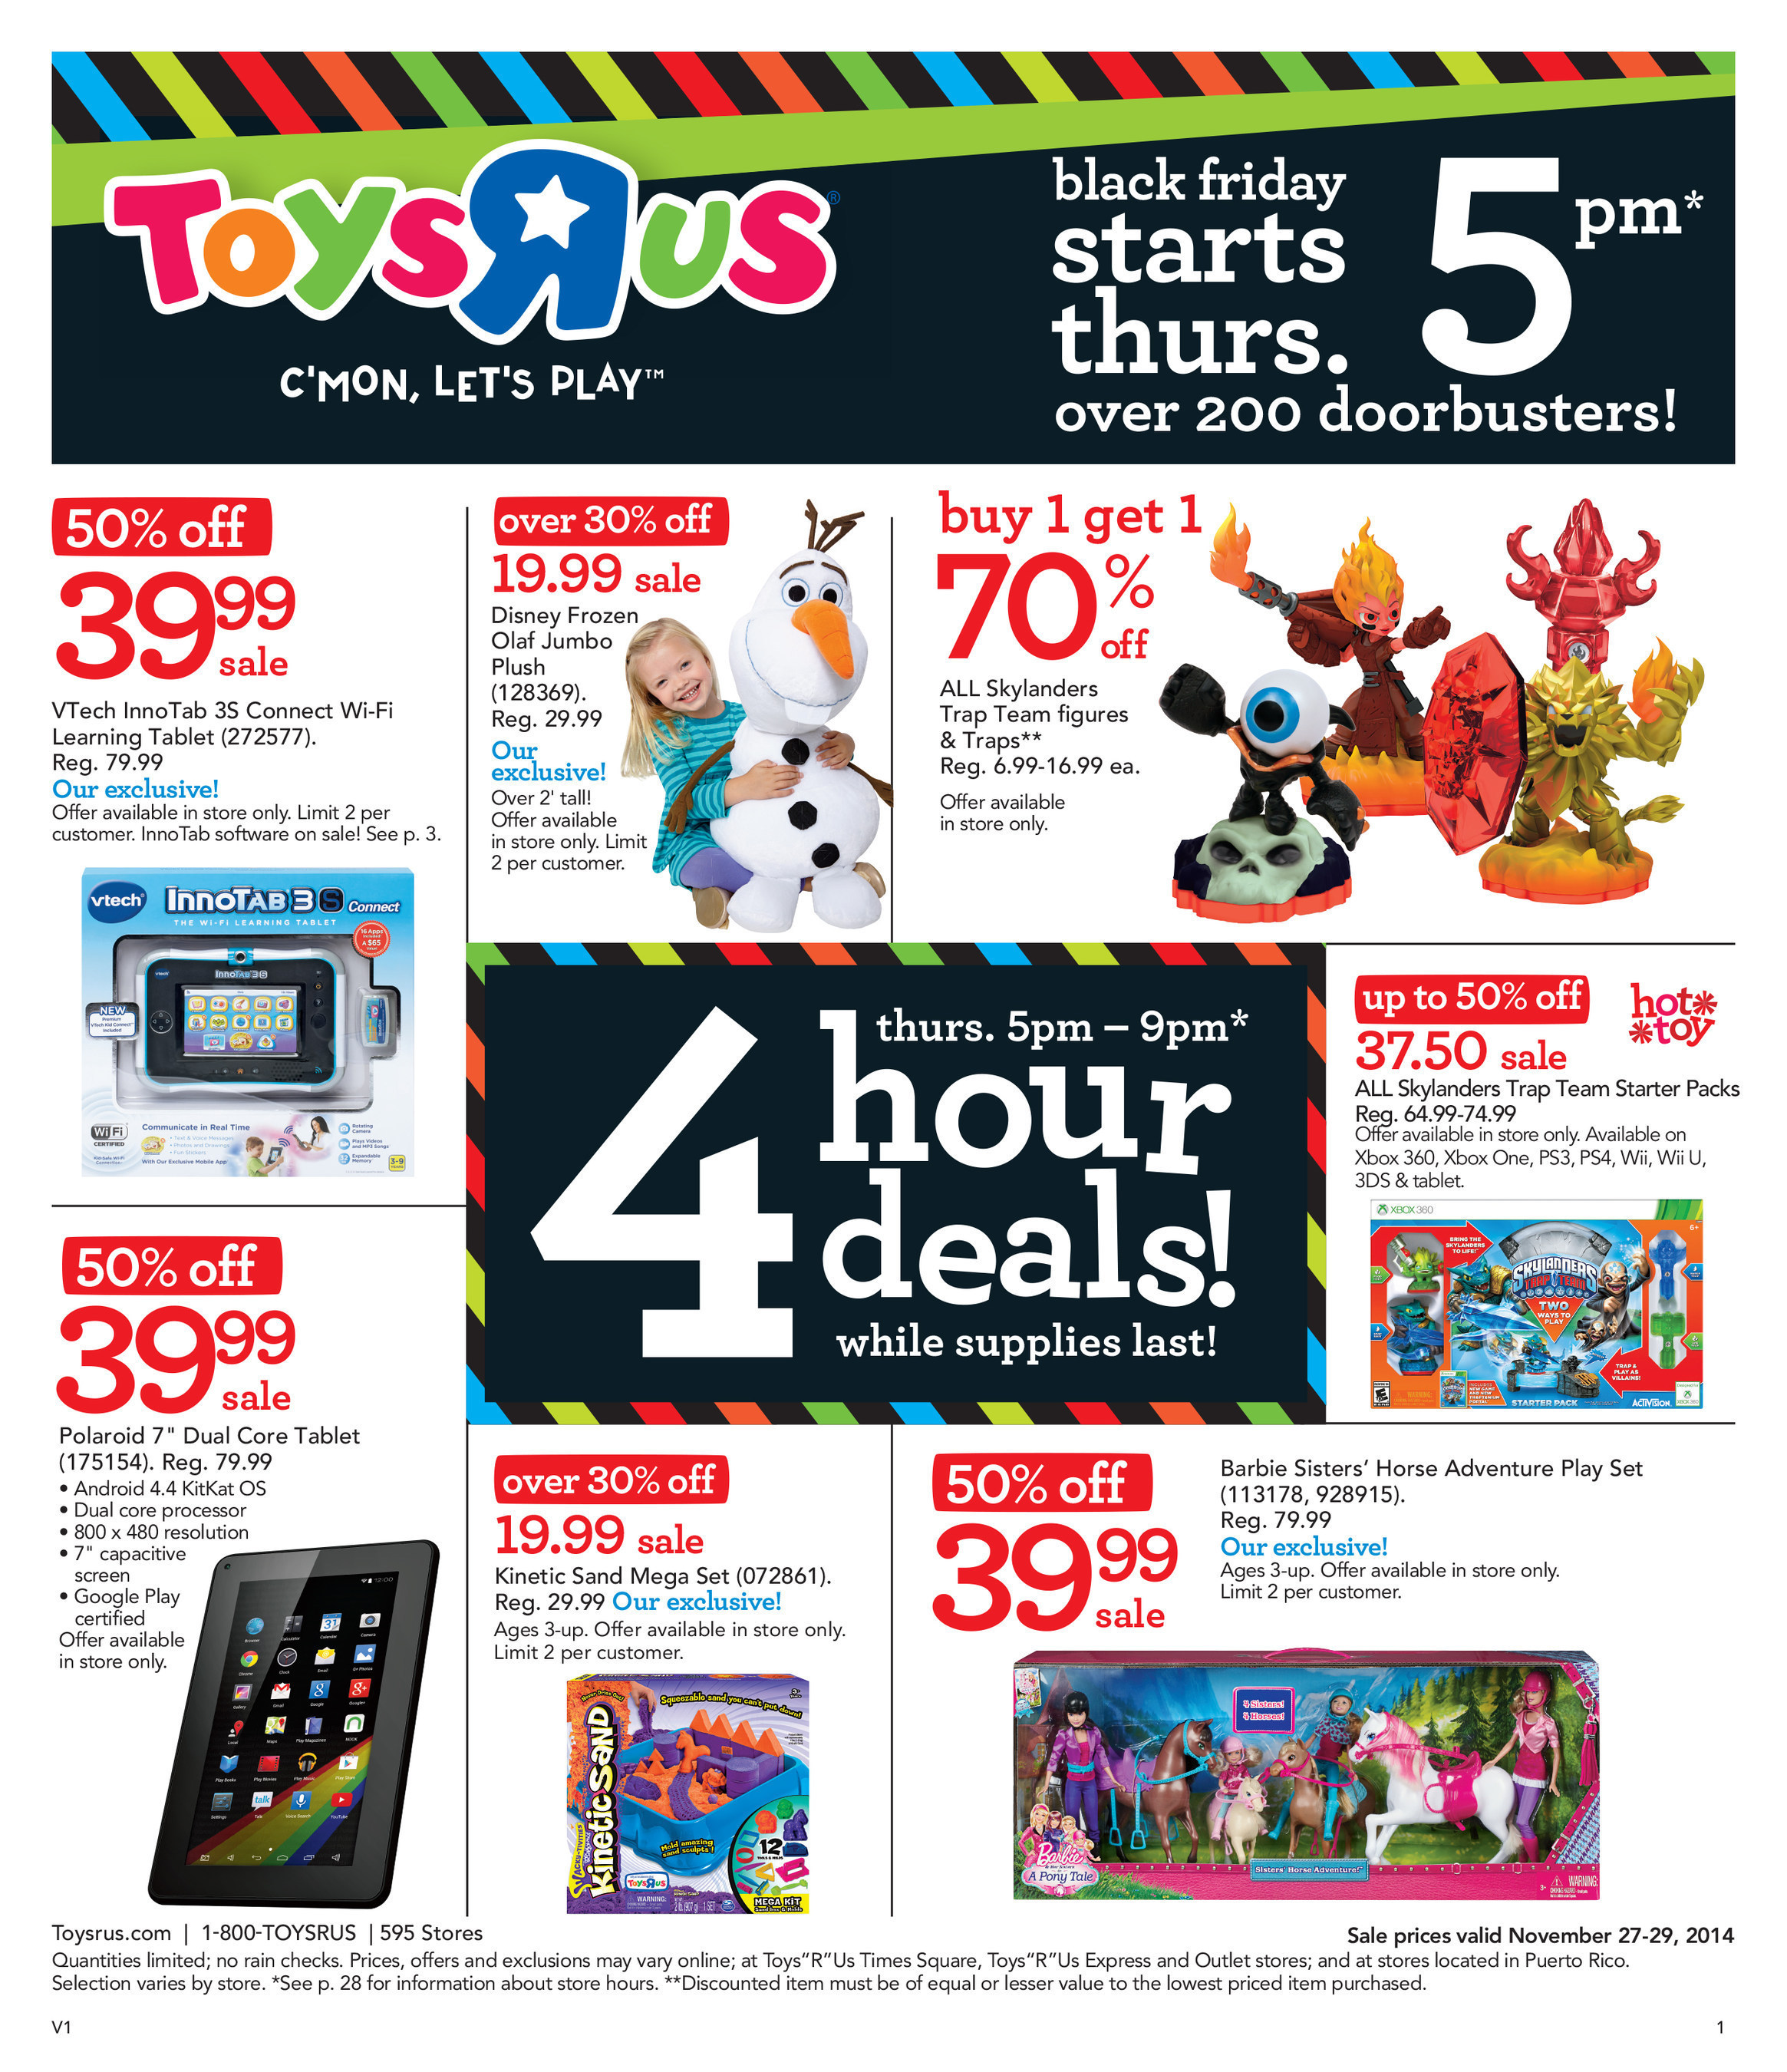 Toys R Us Announces 2014 Thanksgiving Weekend Doorbusters And Provides Its Nearly 19 Million Loyal Customers With Early Access To Hot Black Friday Deals